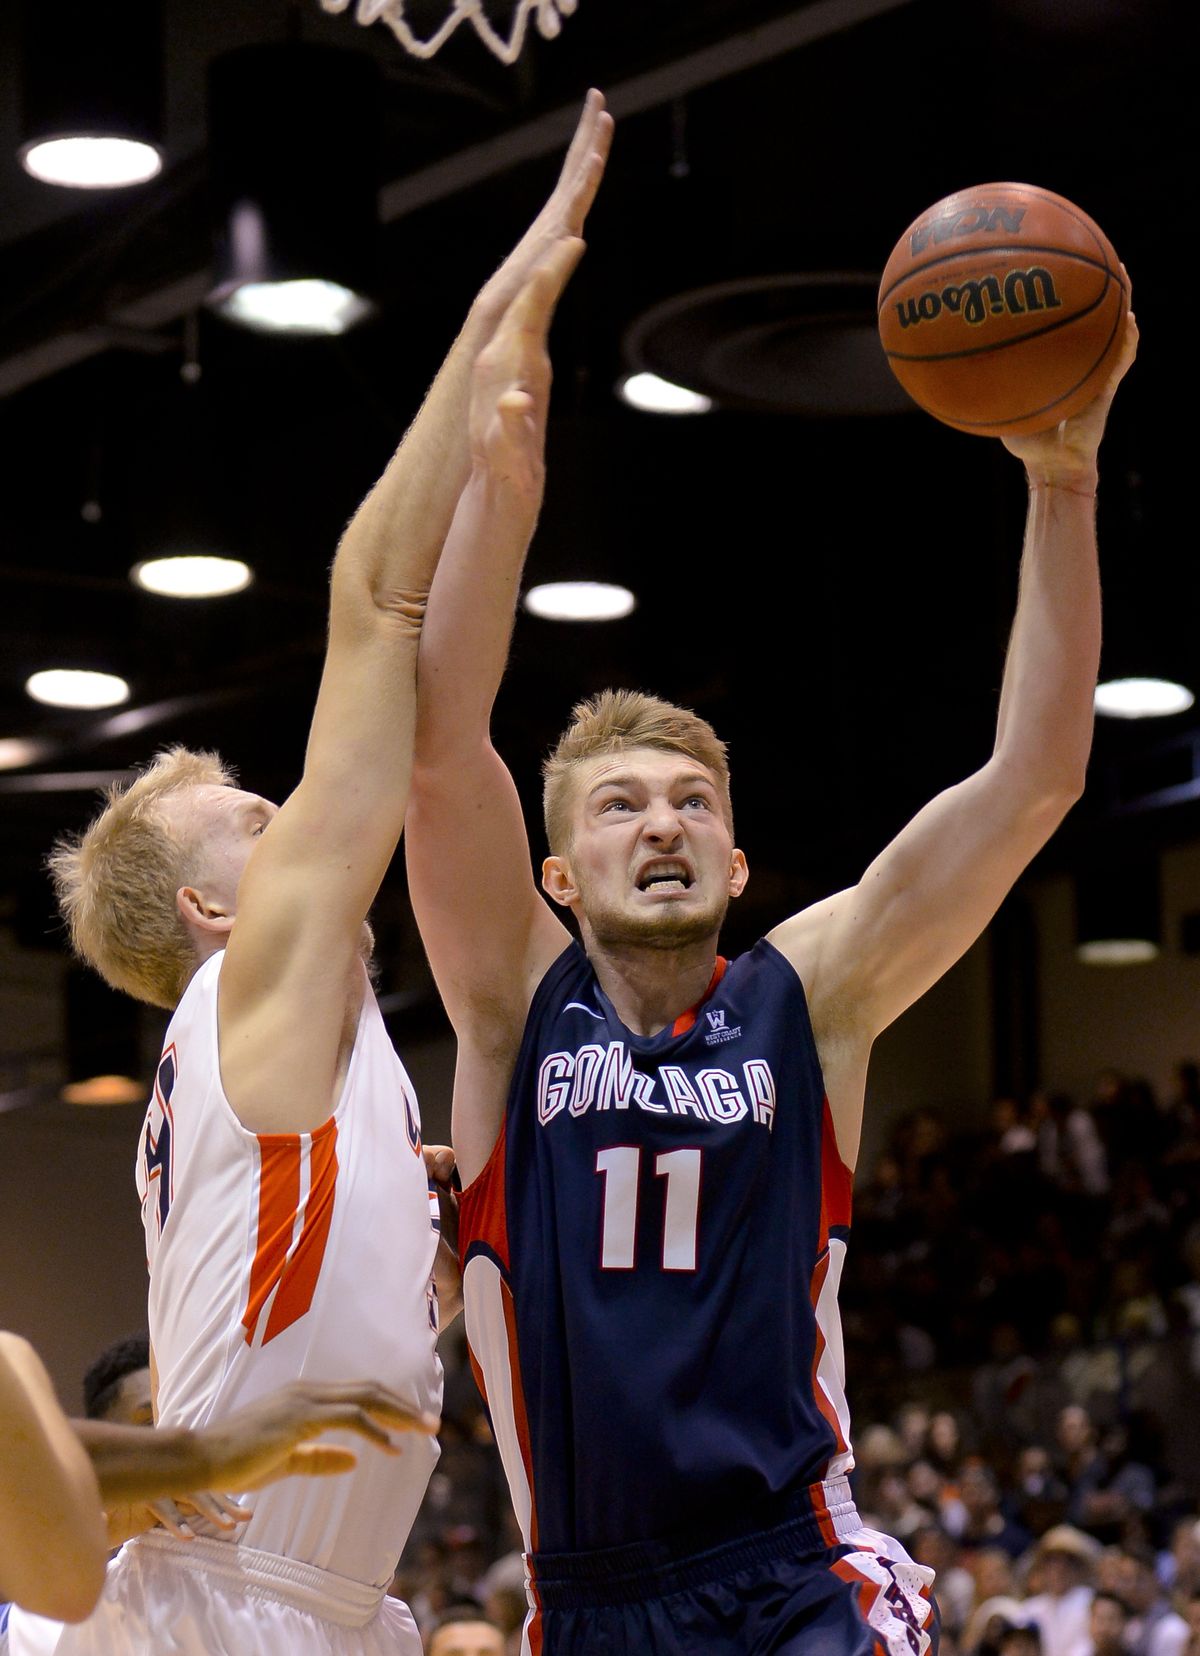 Gonzaga forward Domantas Sabonis drives past Pepperdine’s Jake Johnson for two of his 18 points. (Associated Press)